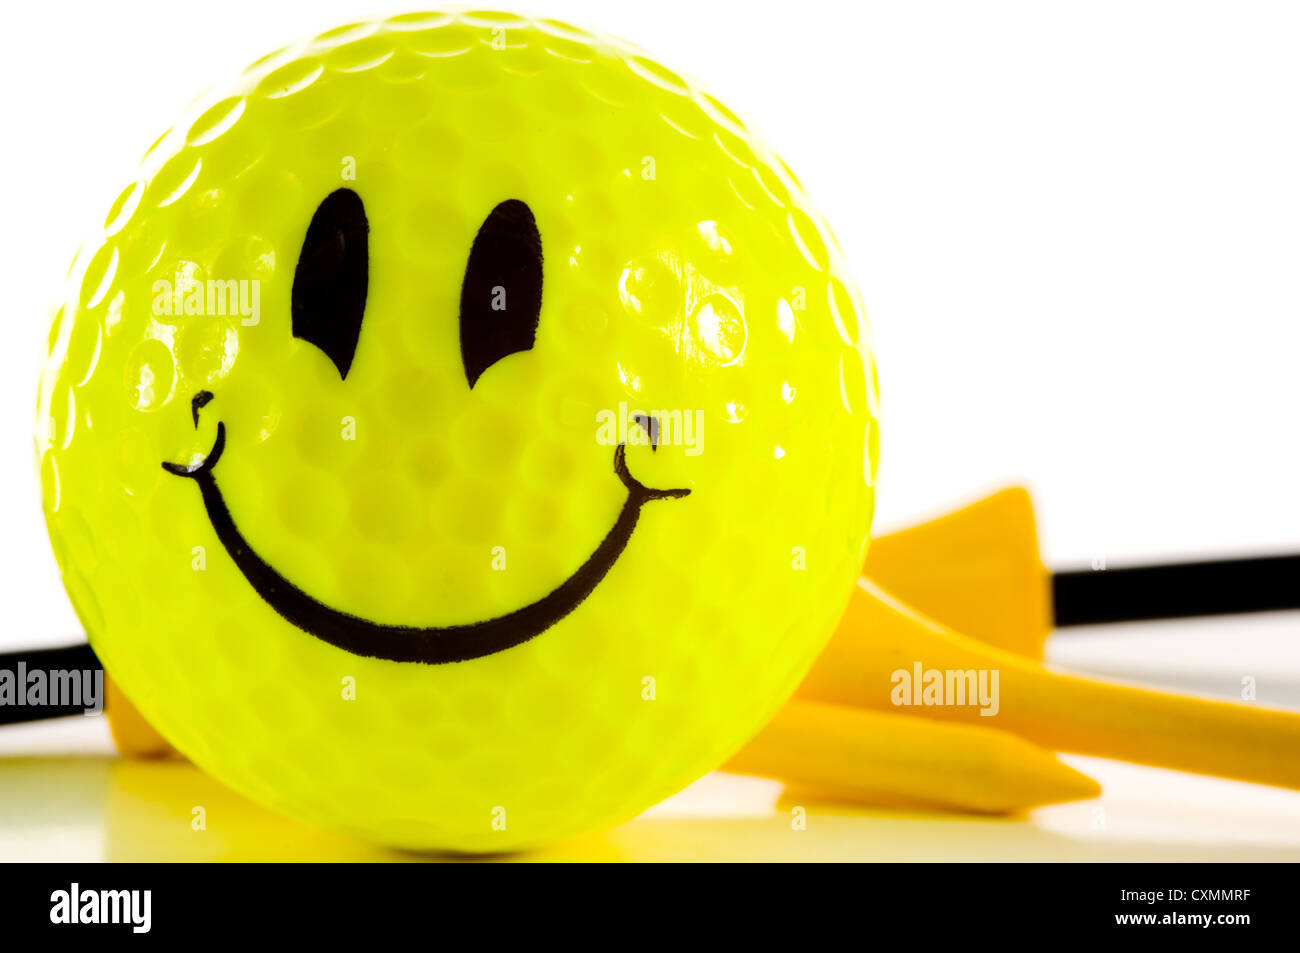 Golf tee and a yellow smiley face golf ball on a white background Stock Photo